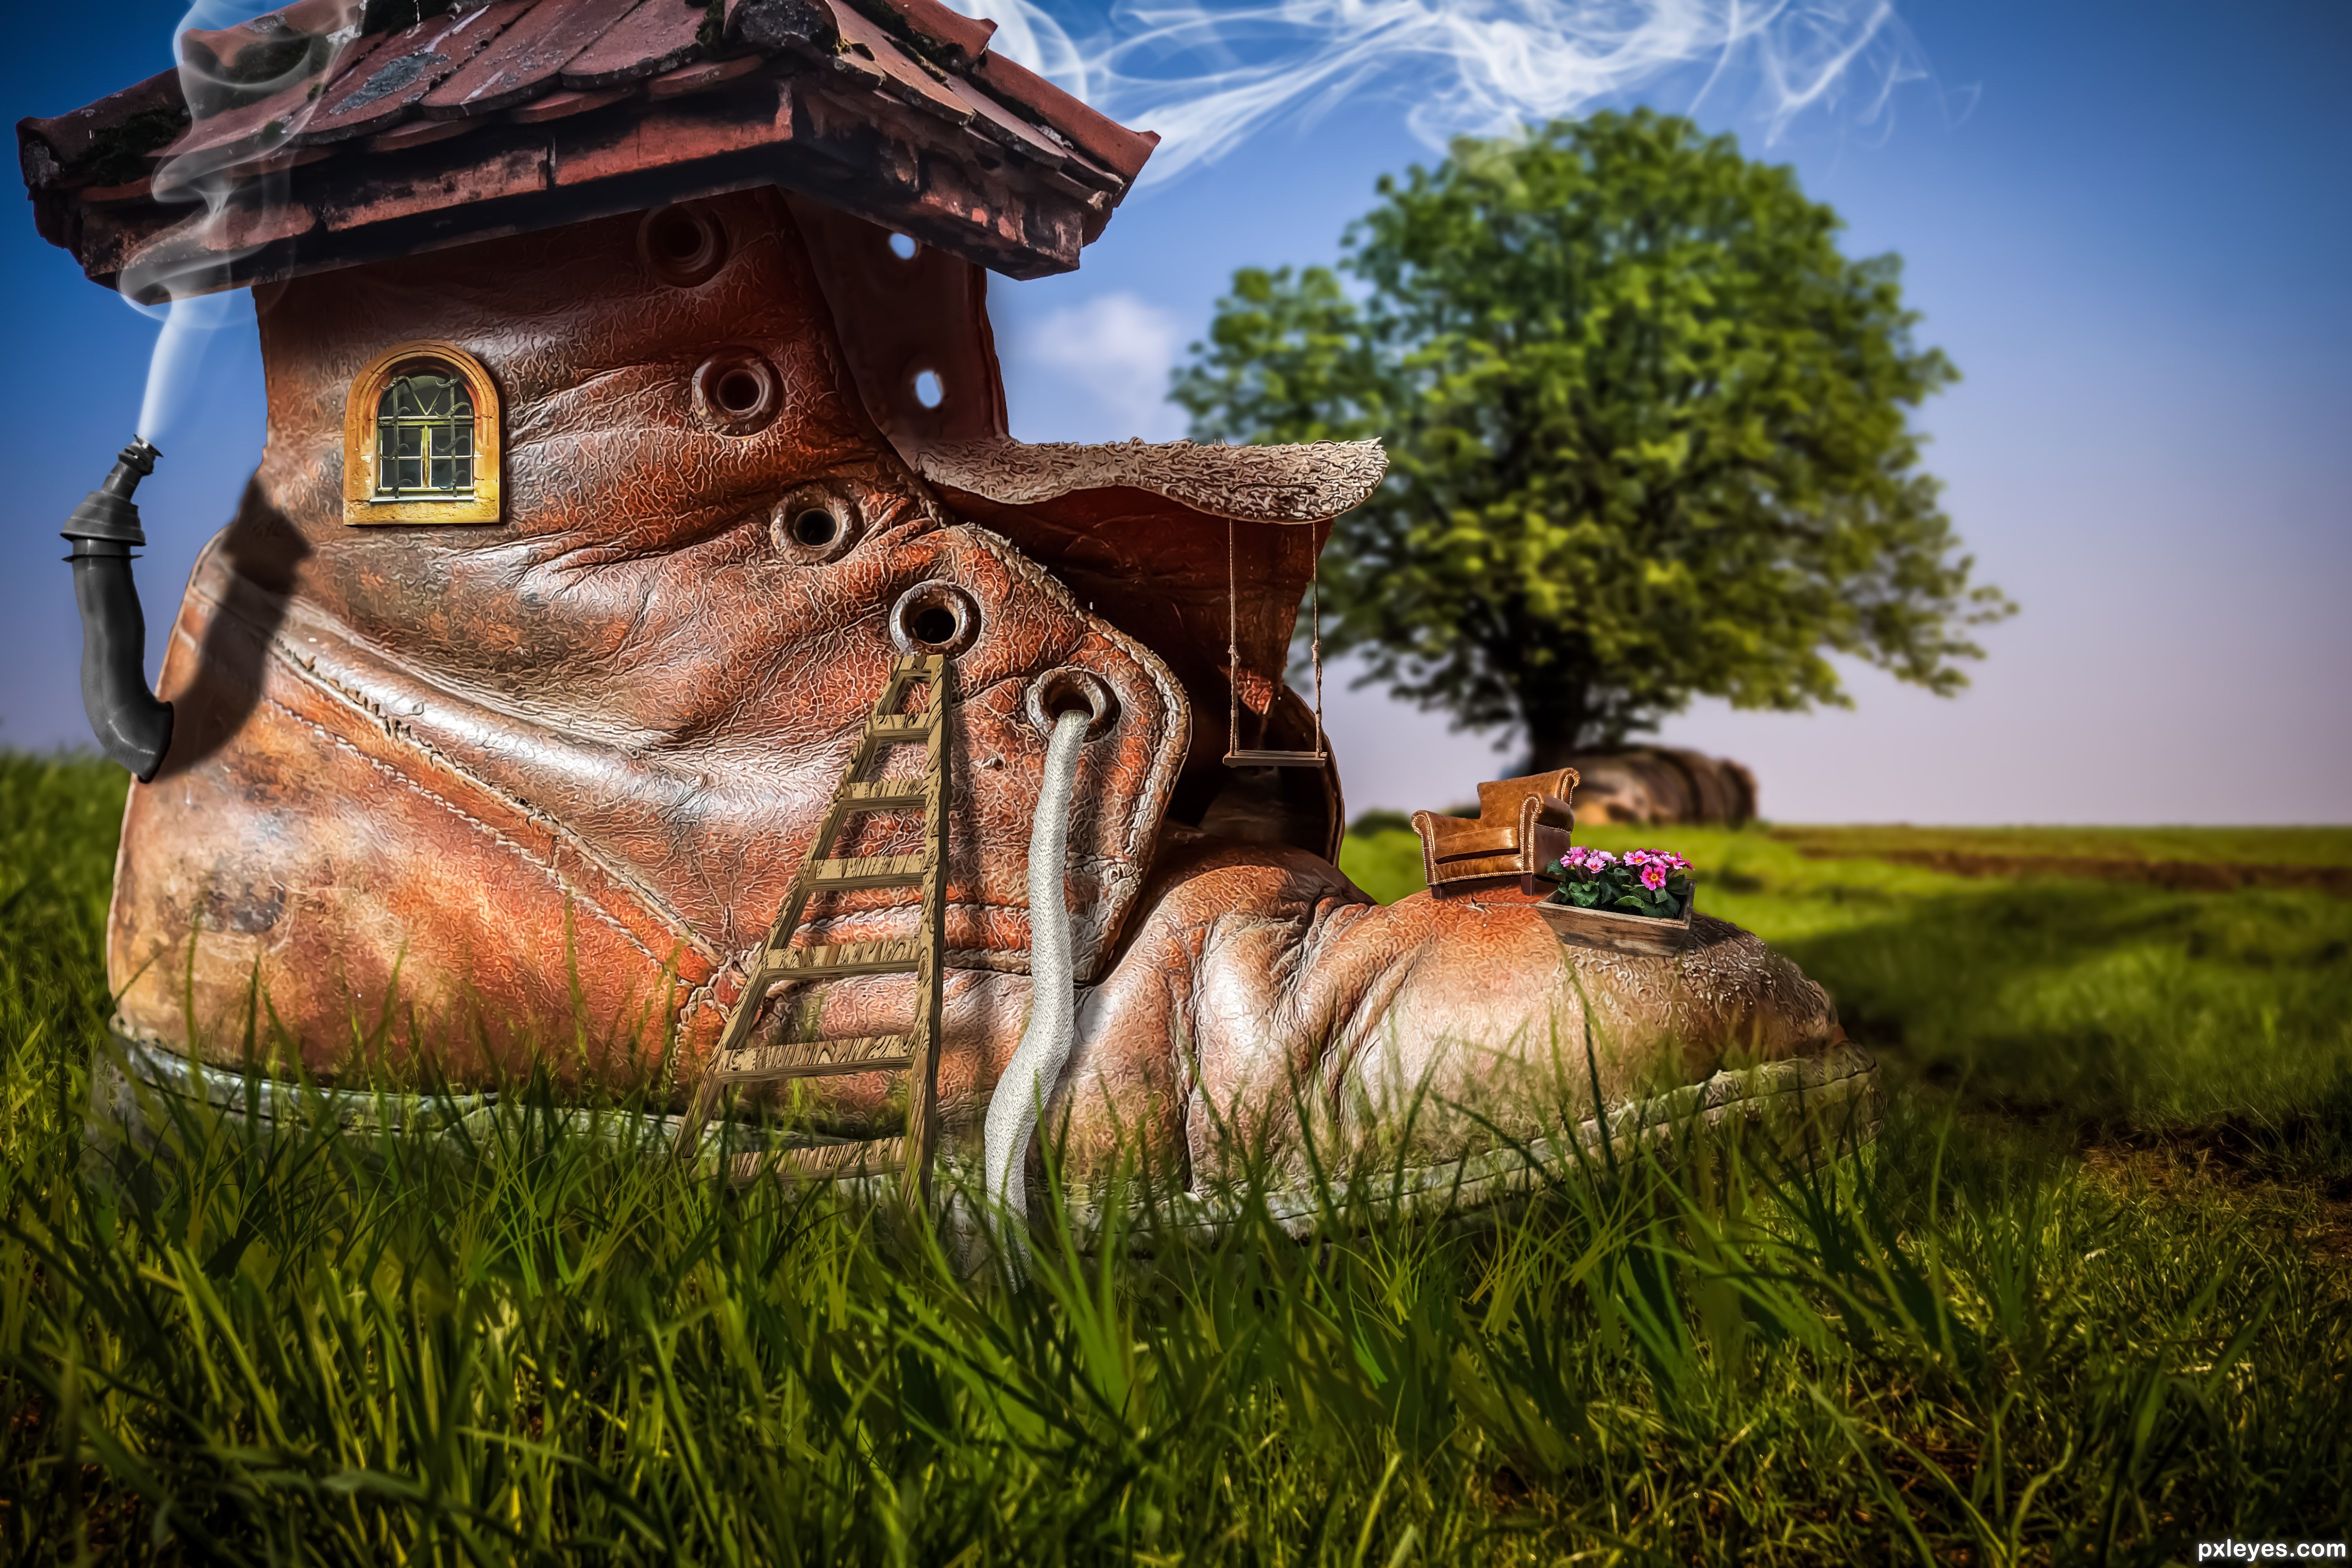 digital art, Fantasy art, Architecture, Building, House, Artwork, Painting, Boots, Nature, Landscape, Ladders, Grass, Trees, Chimneys, Window, Smoke, Shoes, Lace, Swirls, Depth of field Wallpaper